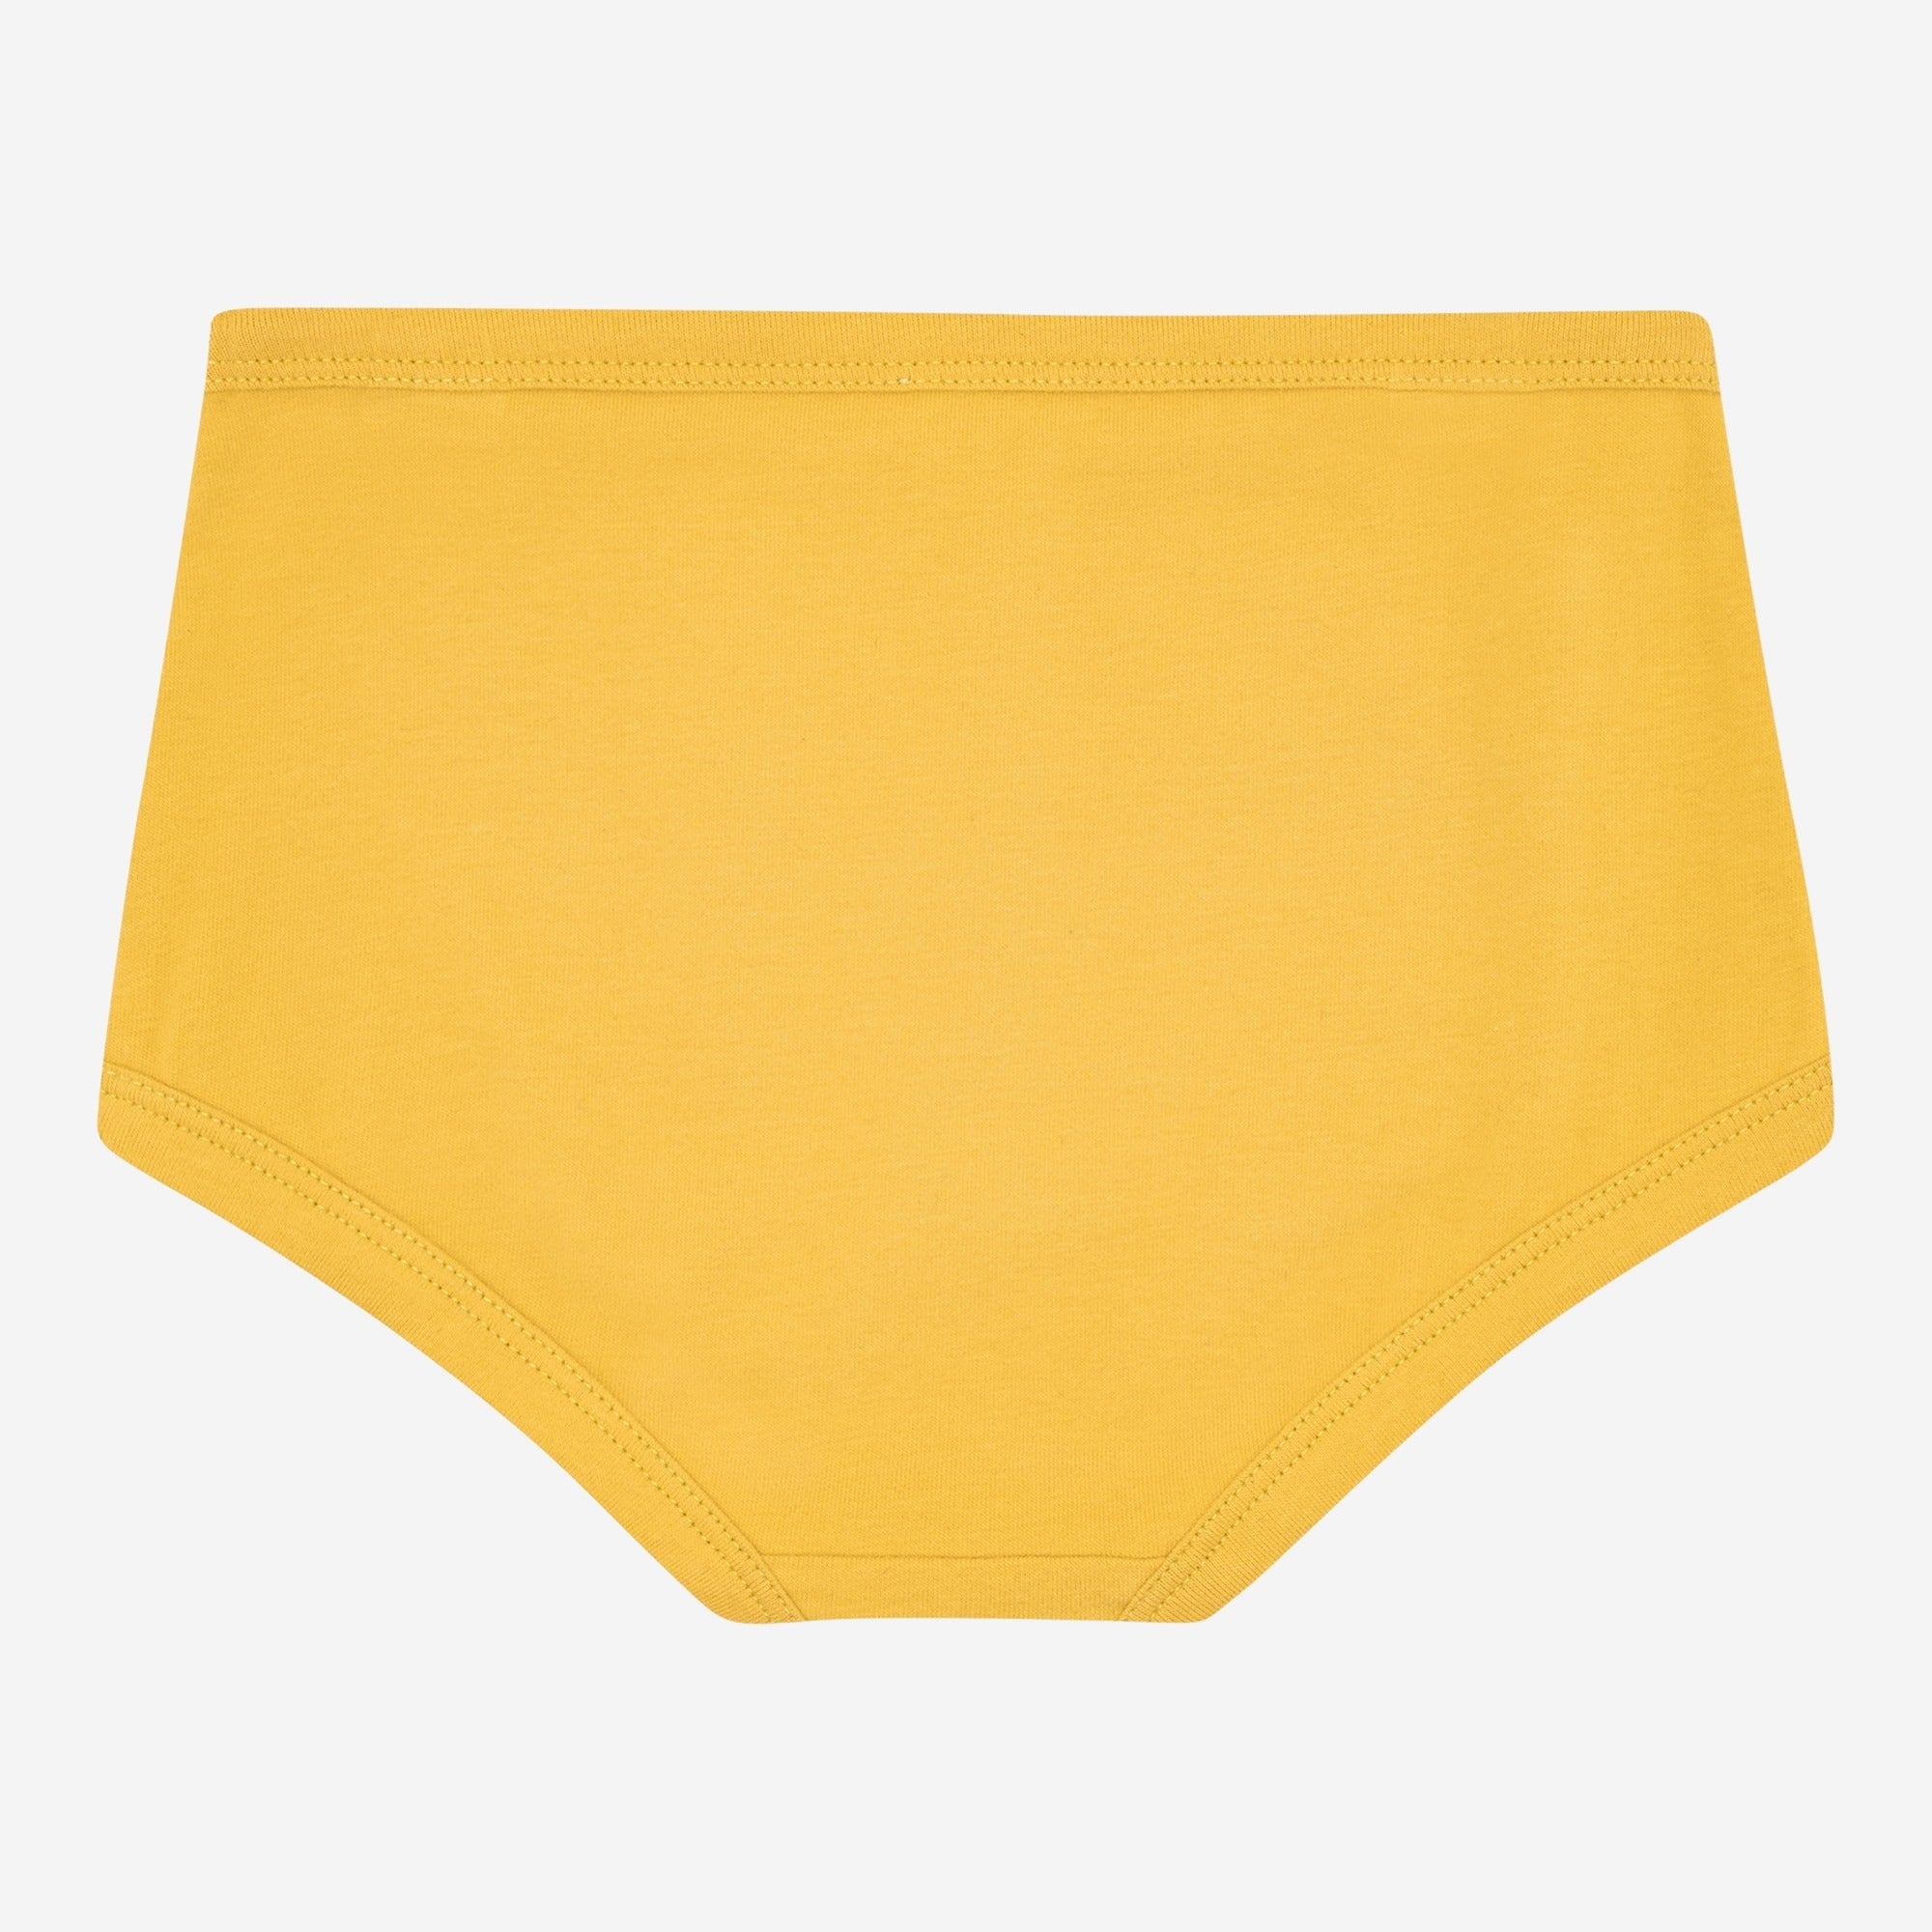 HIGH RISE UNDIES IN YELLOW CALICO — Shop Boswell